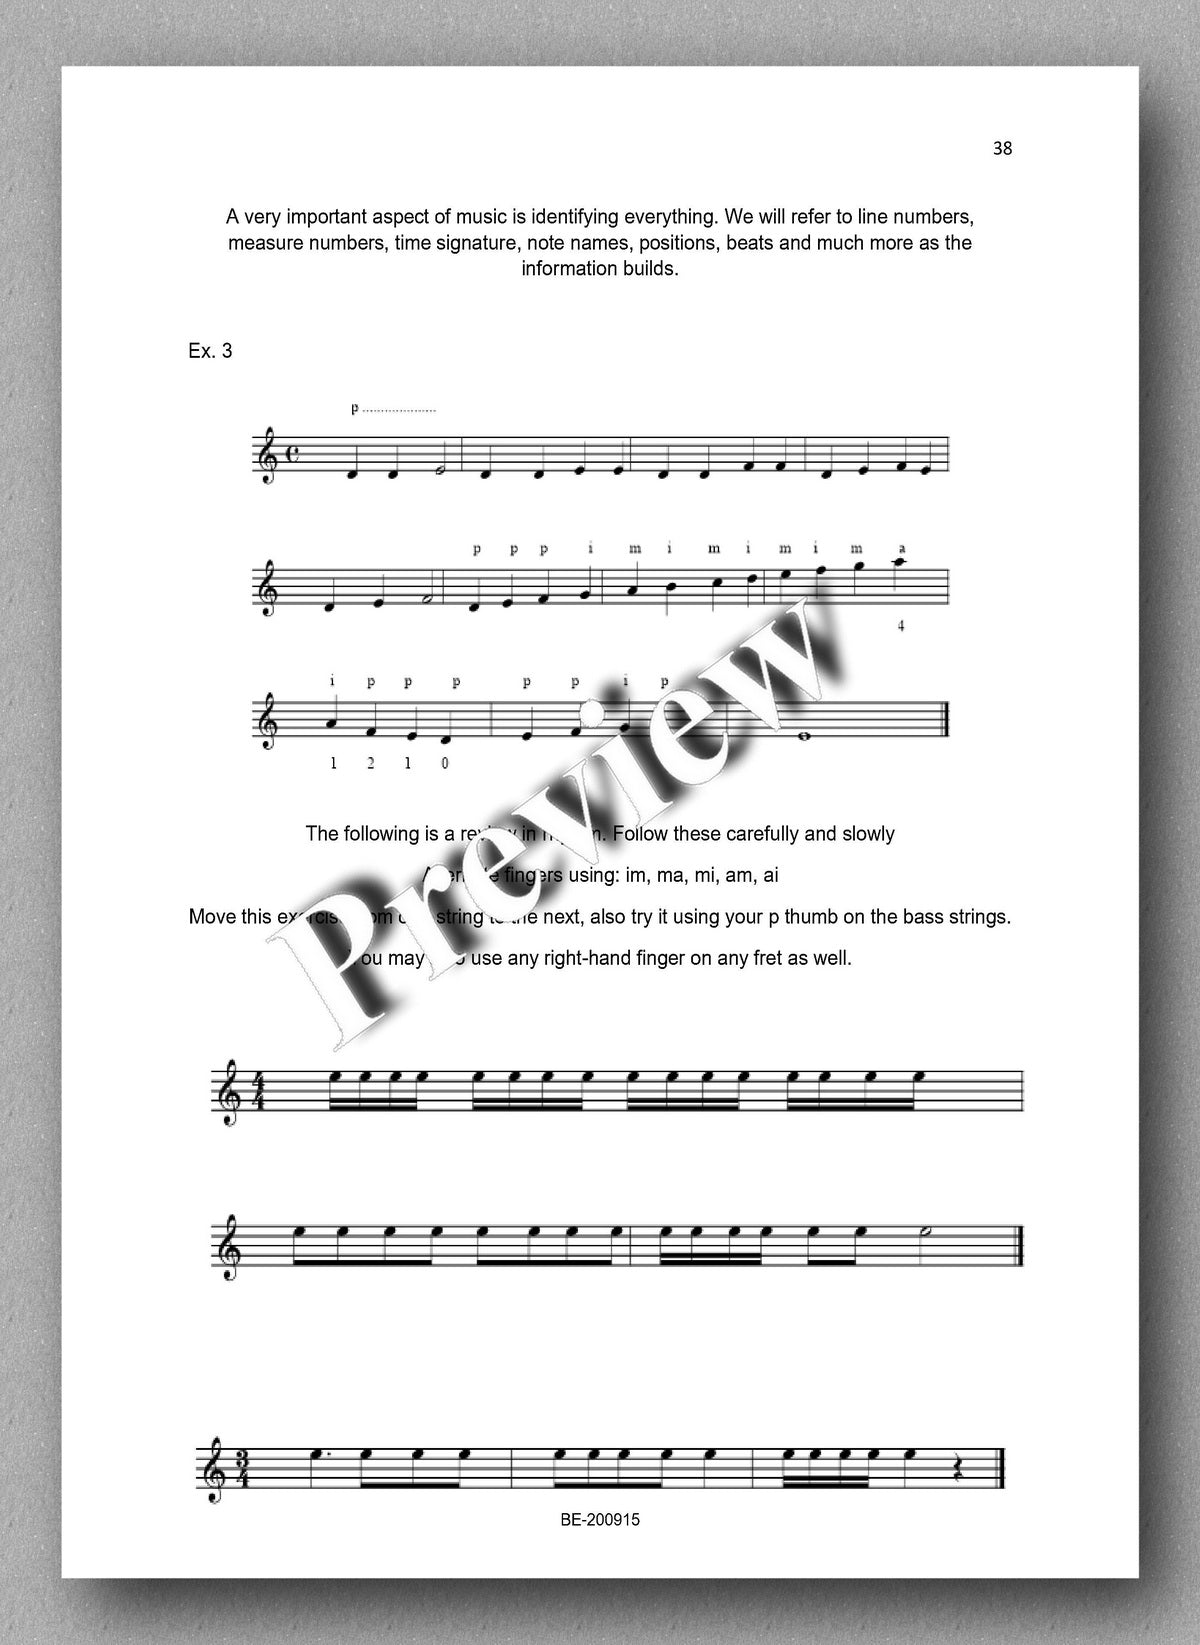 Preparatory Guide for Classical Guitar & Music Theory - preview of the text 3